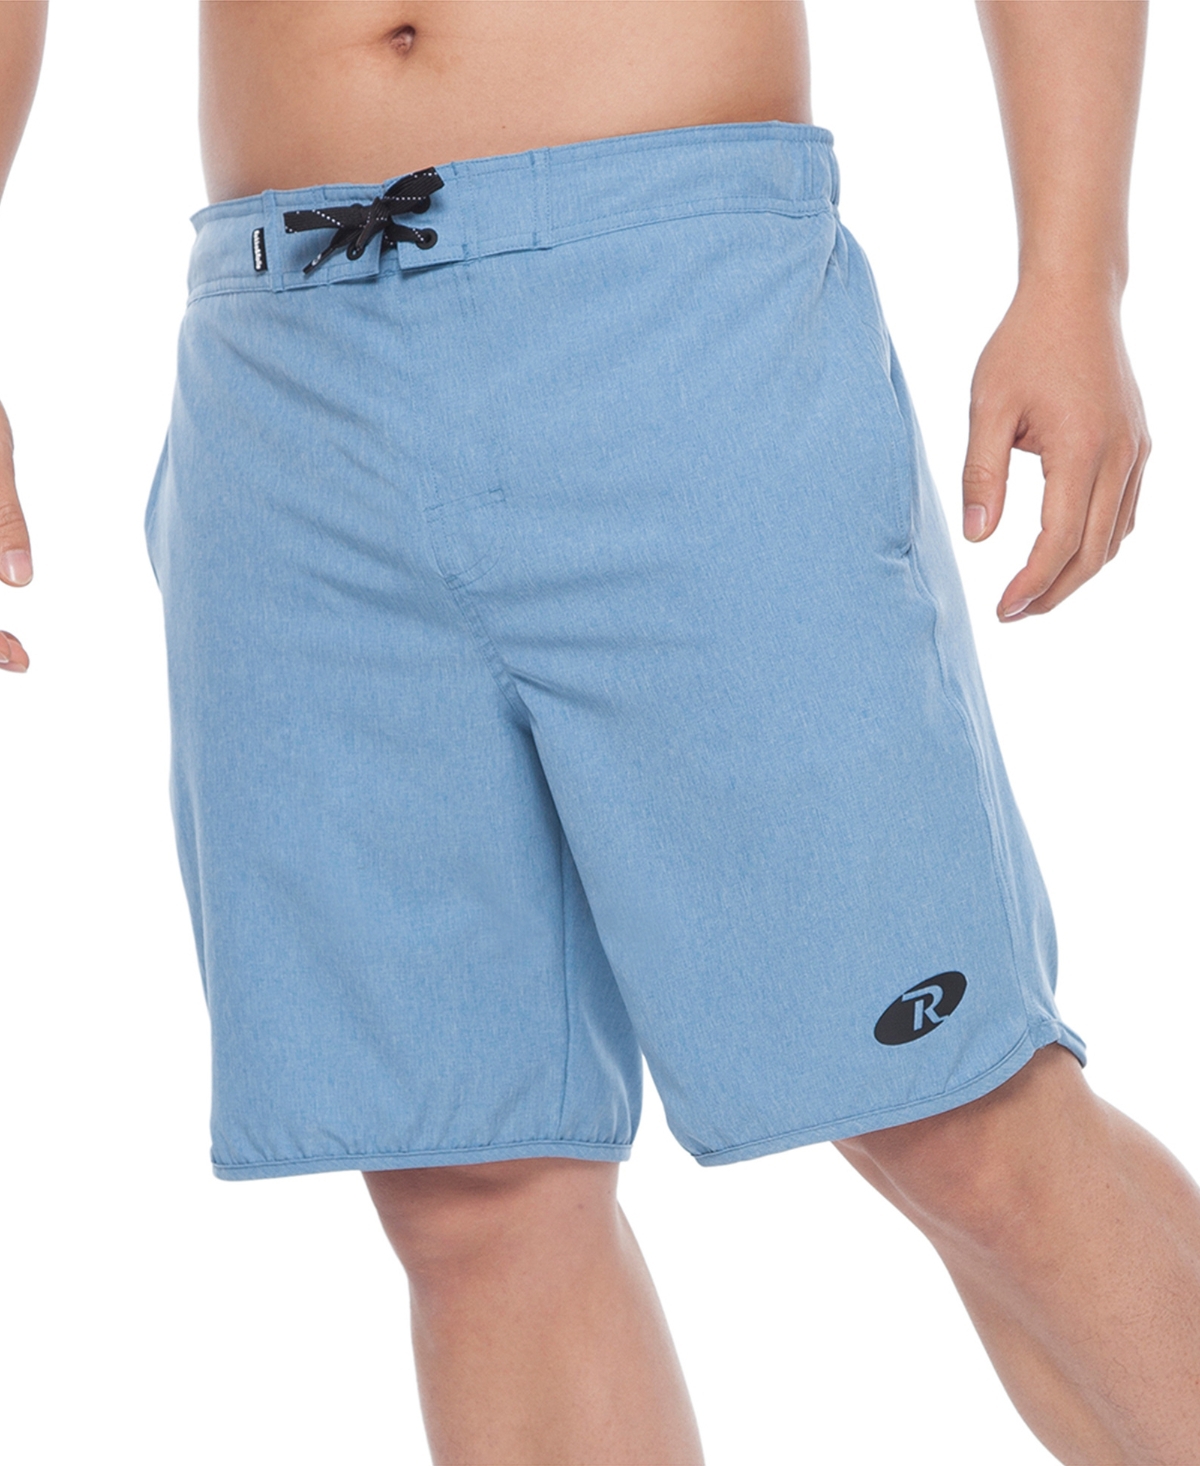 Men's 9" Stretch Mesh Lined Swim Trunks, up to Size 2XL - Teal